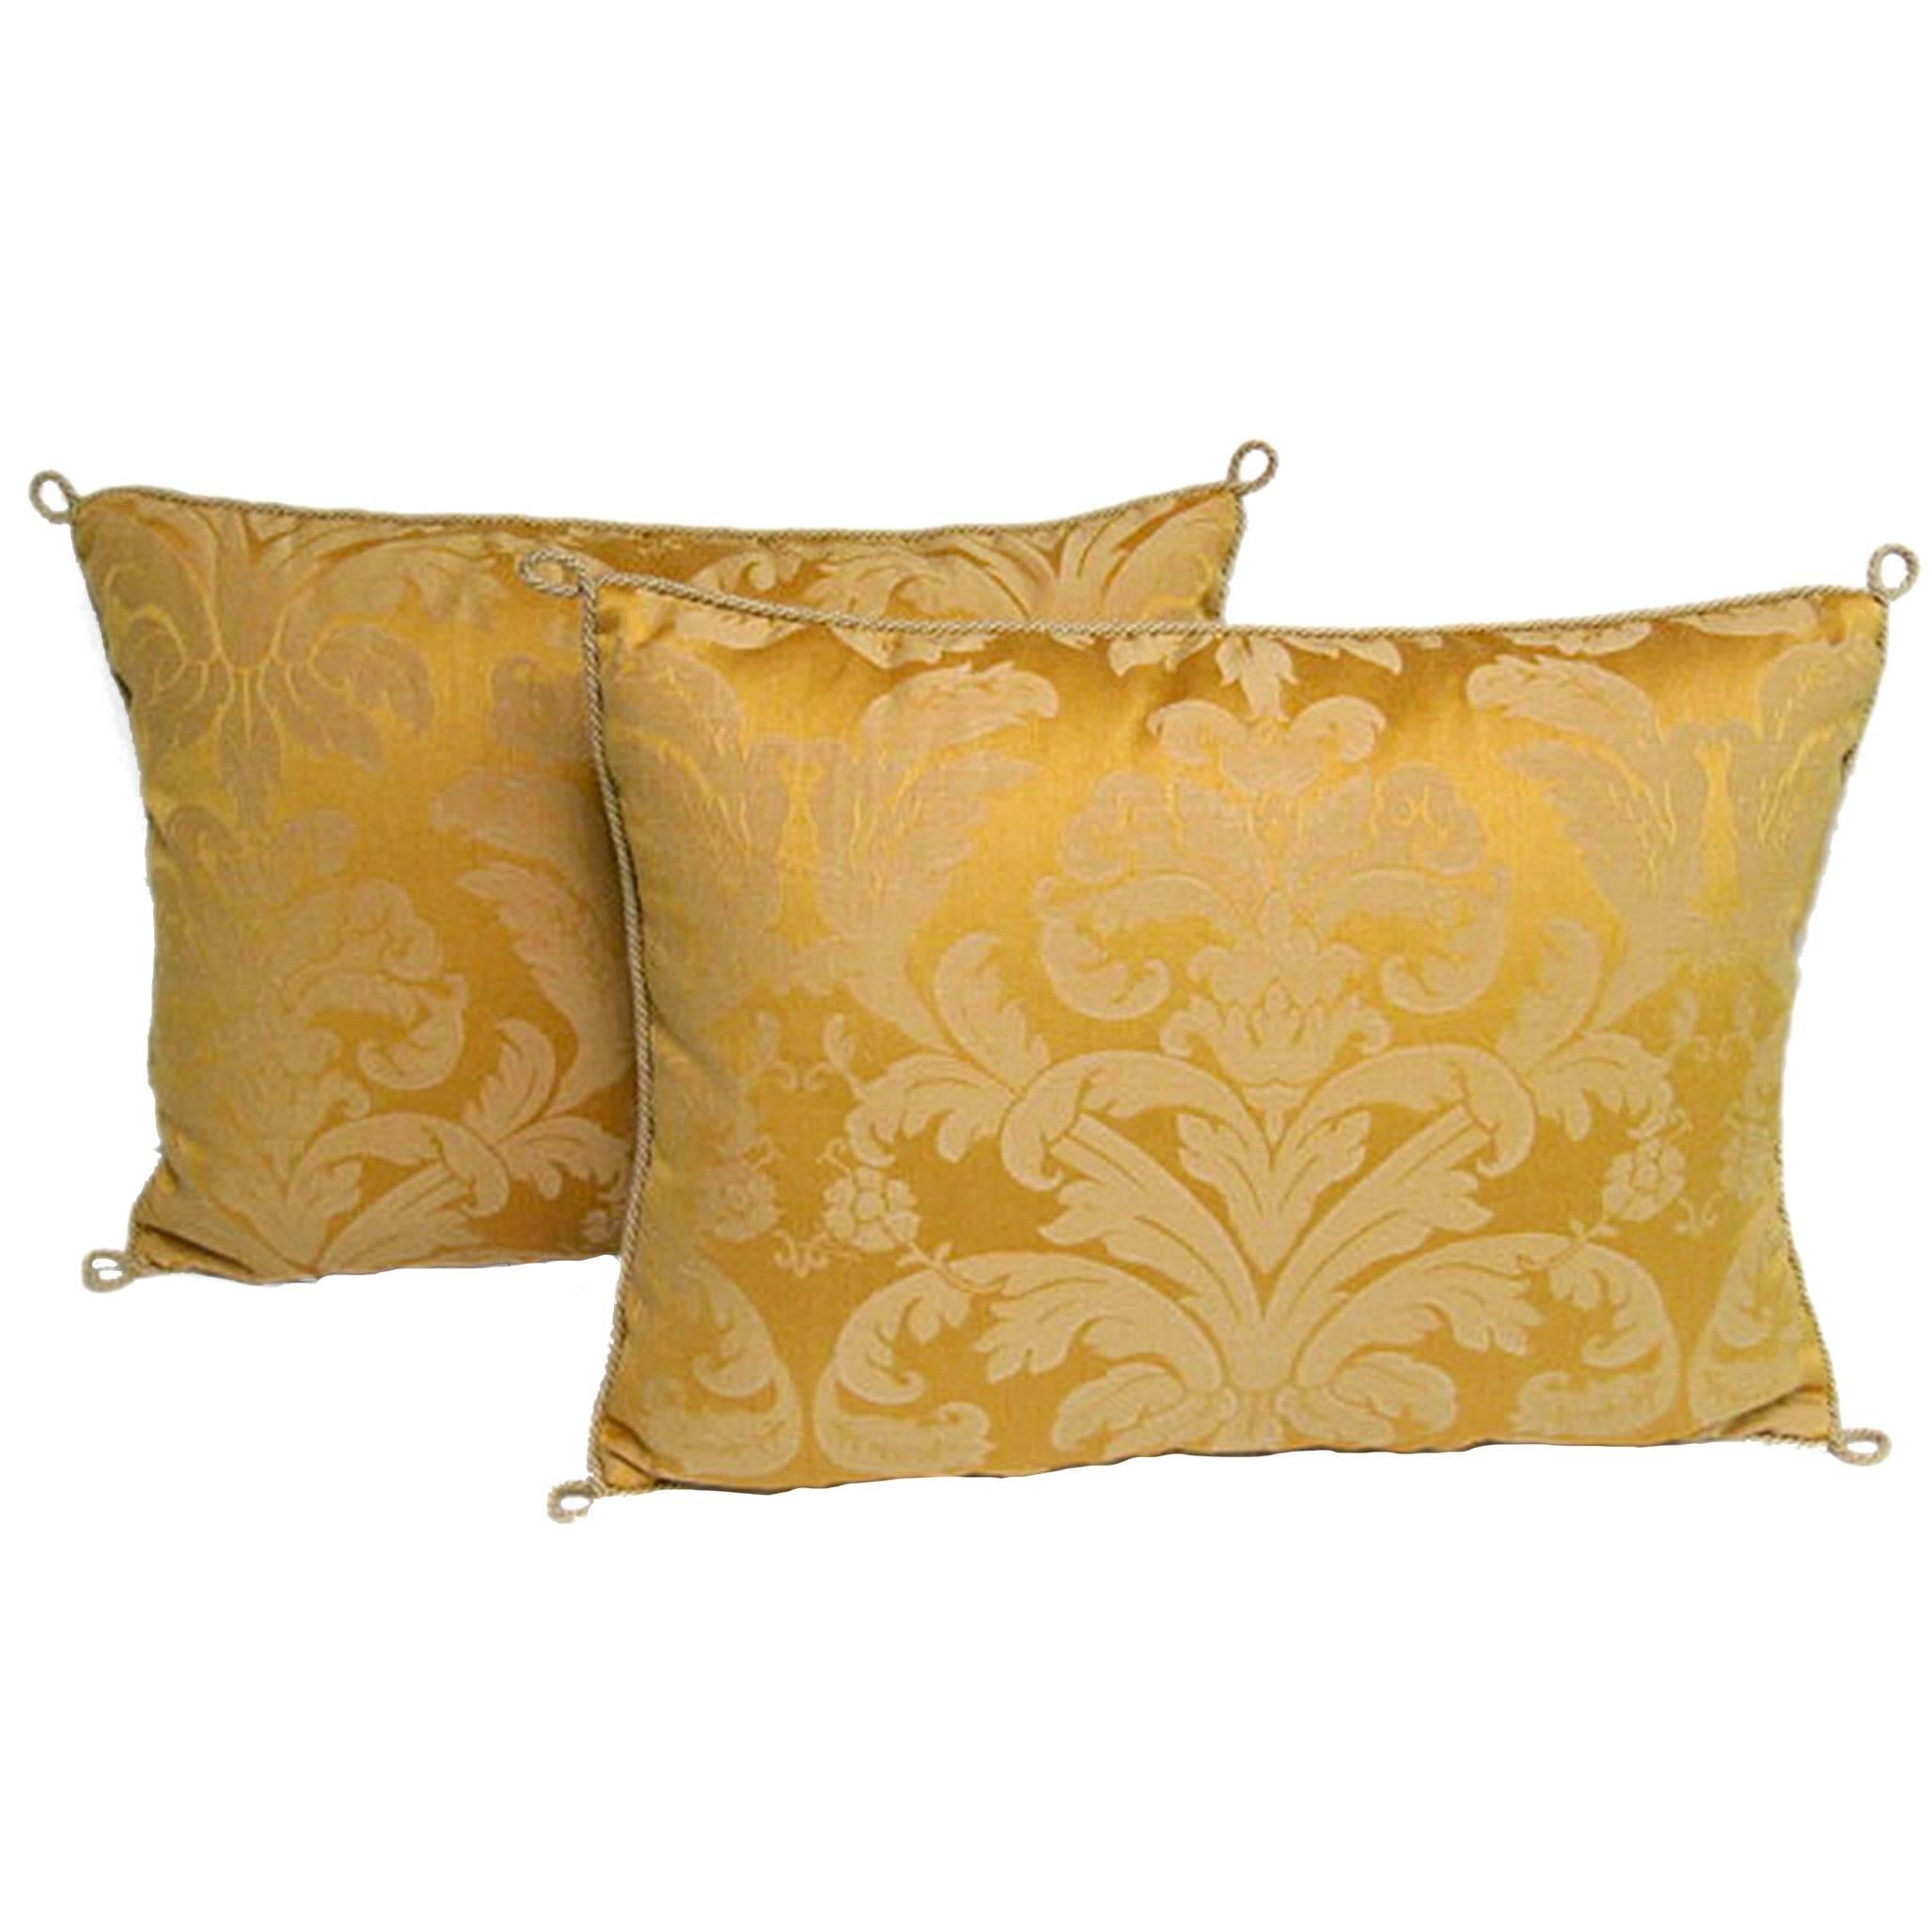 Pair of Handmade Yellow Damask Pillows with a Floral Pattern For Sale